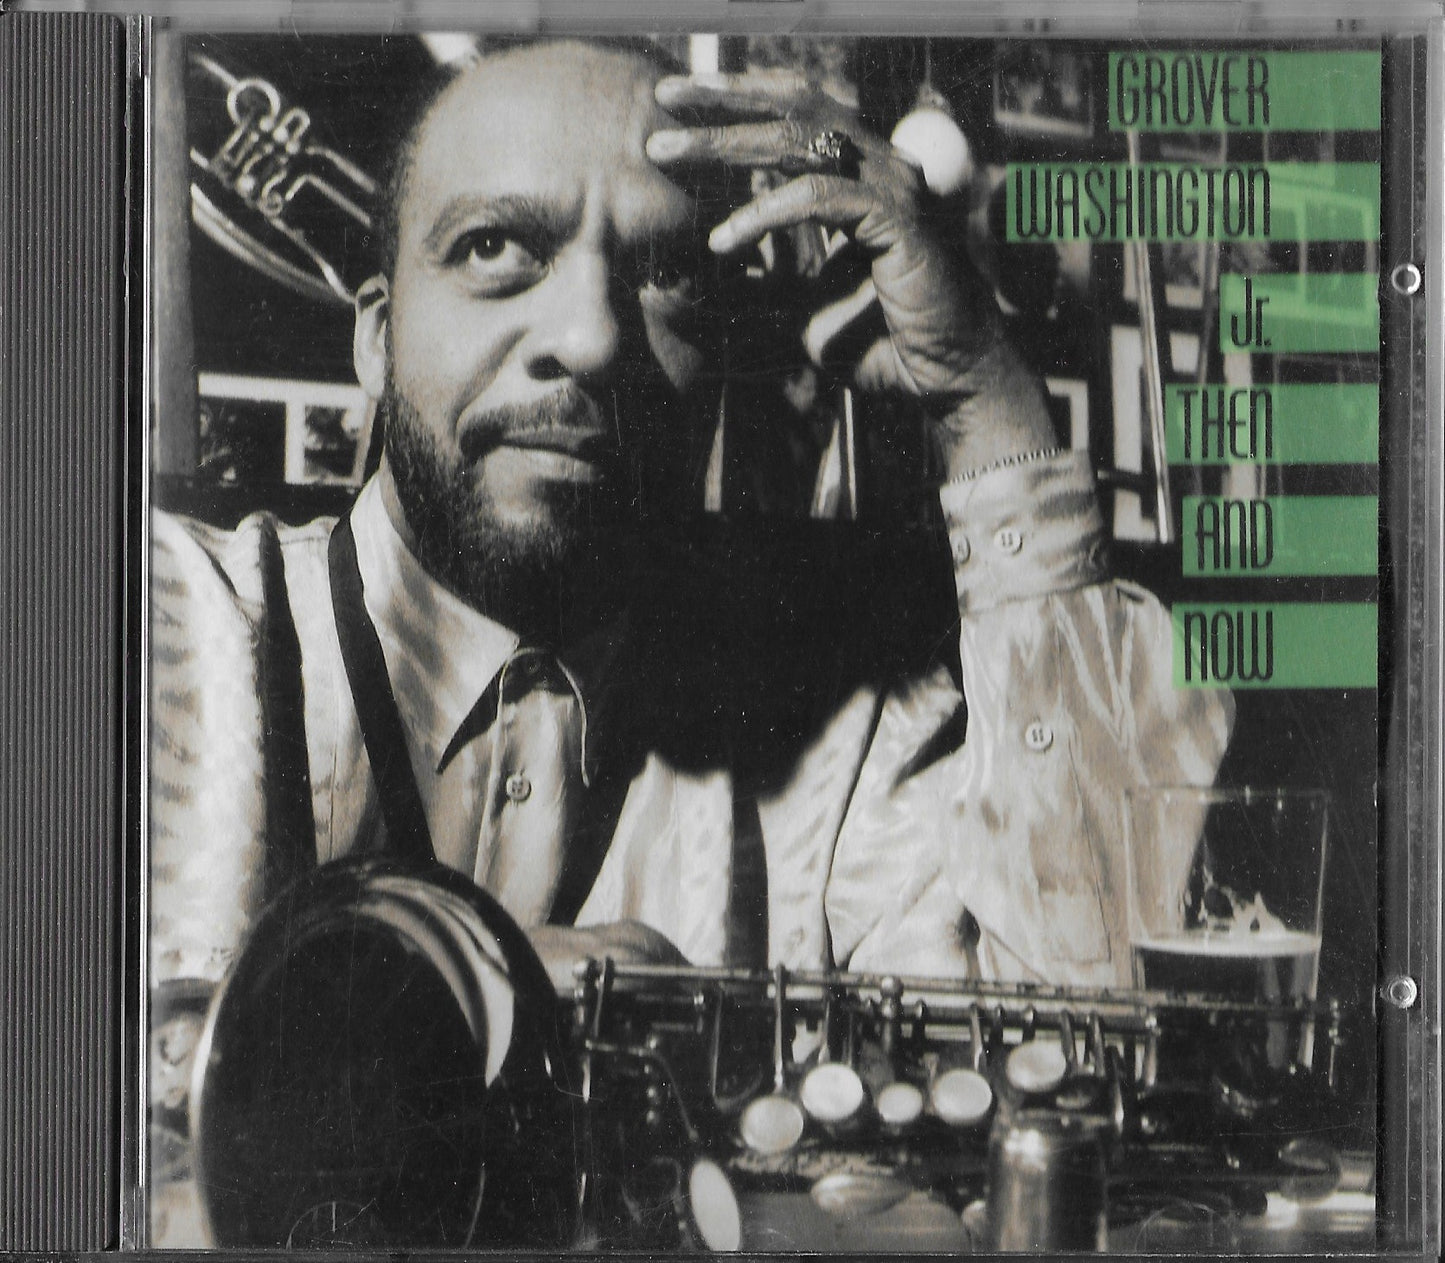 GROVER WASHINGTON JR. - Then and Now